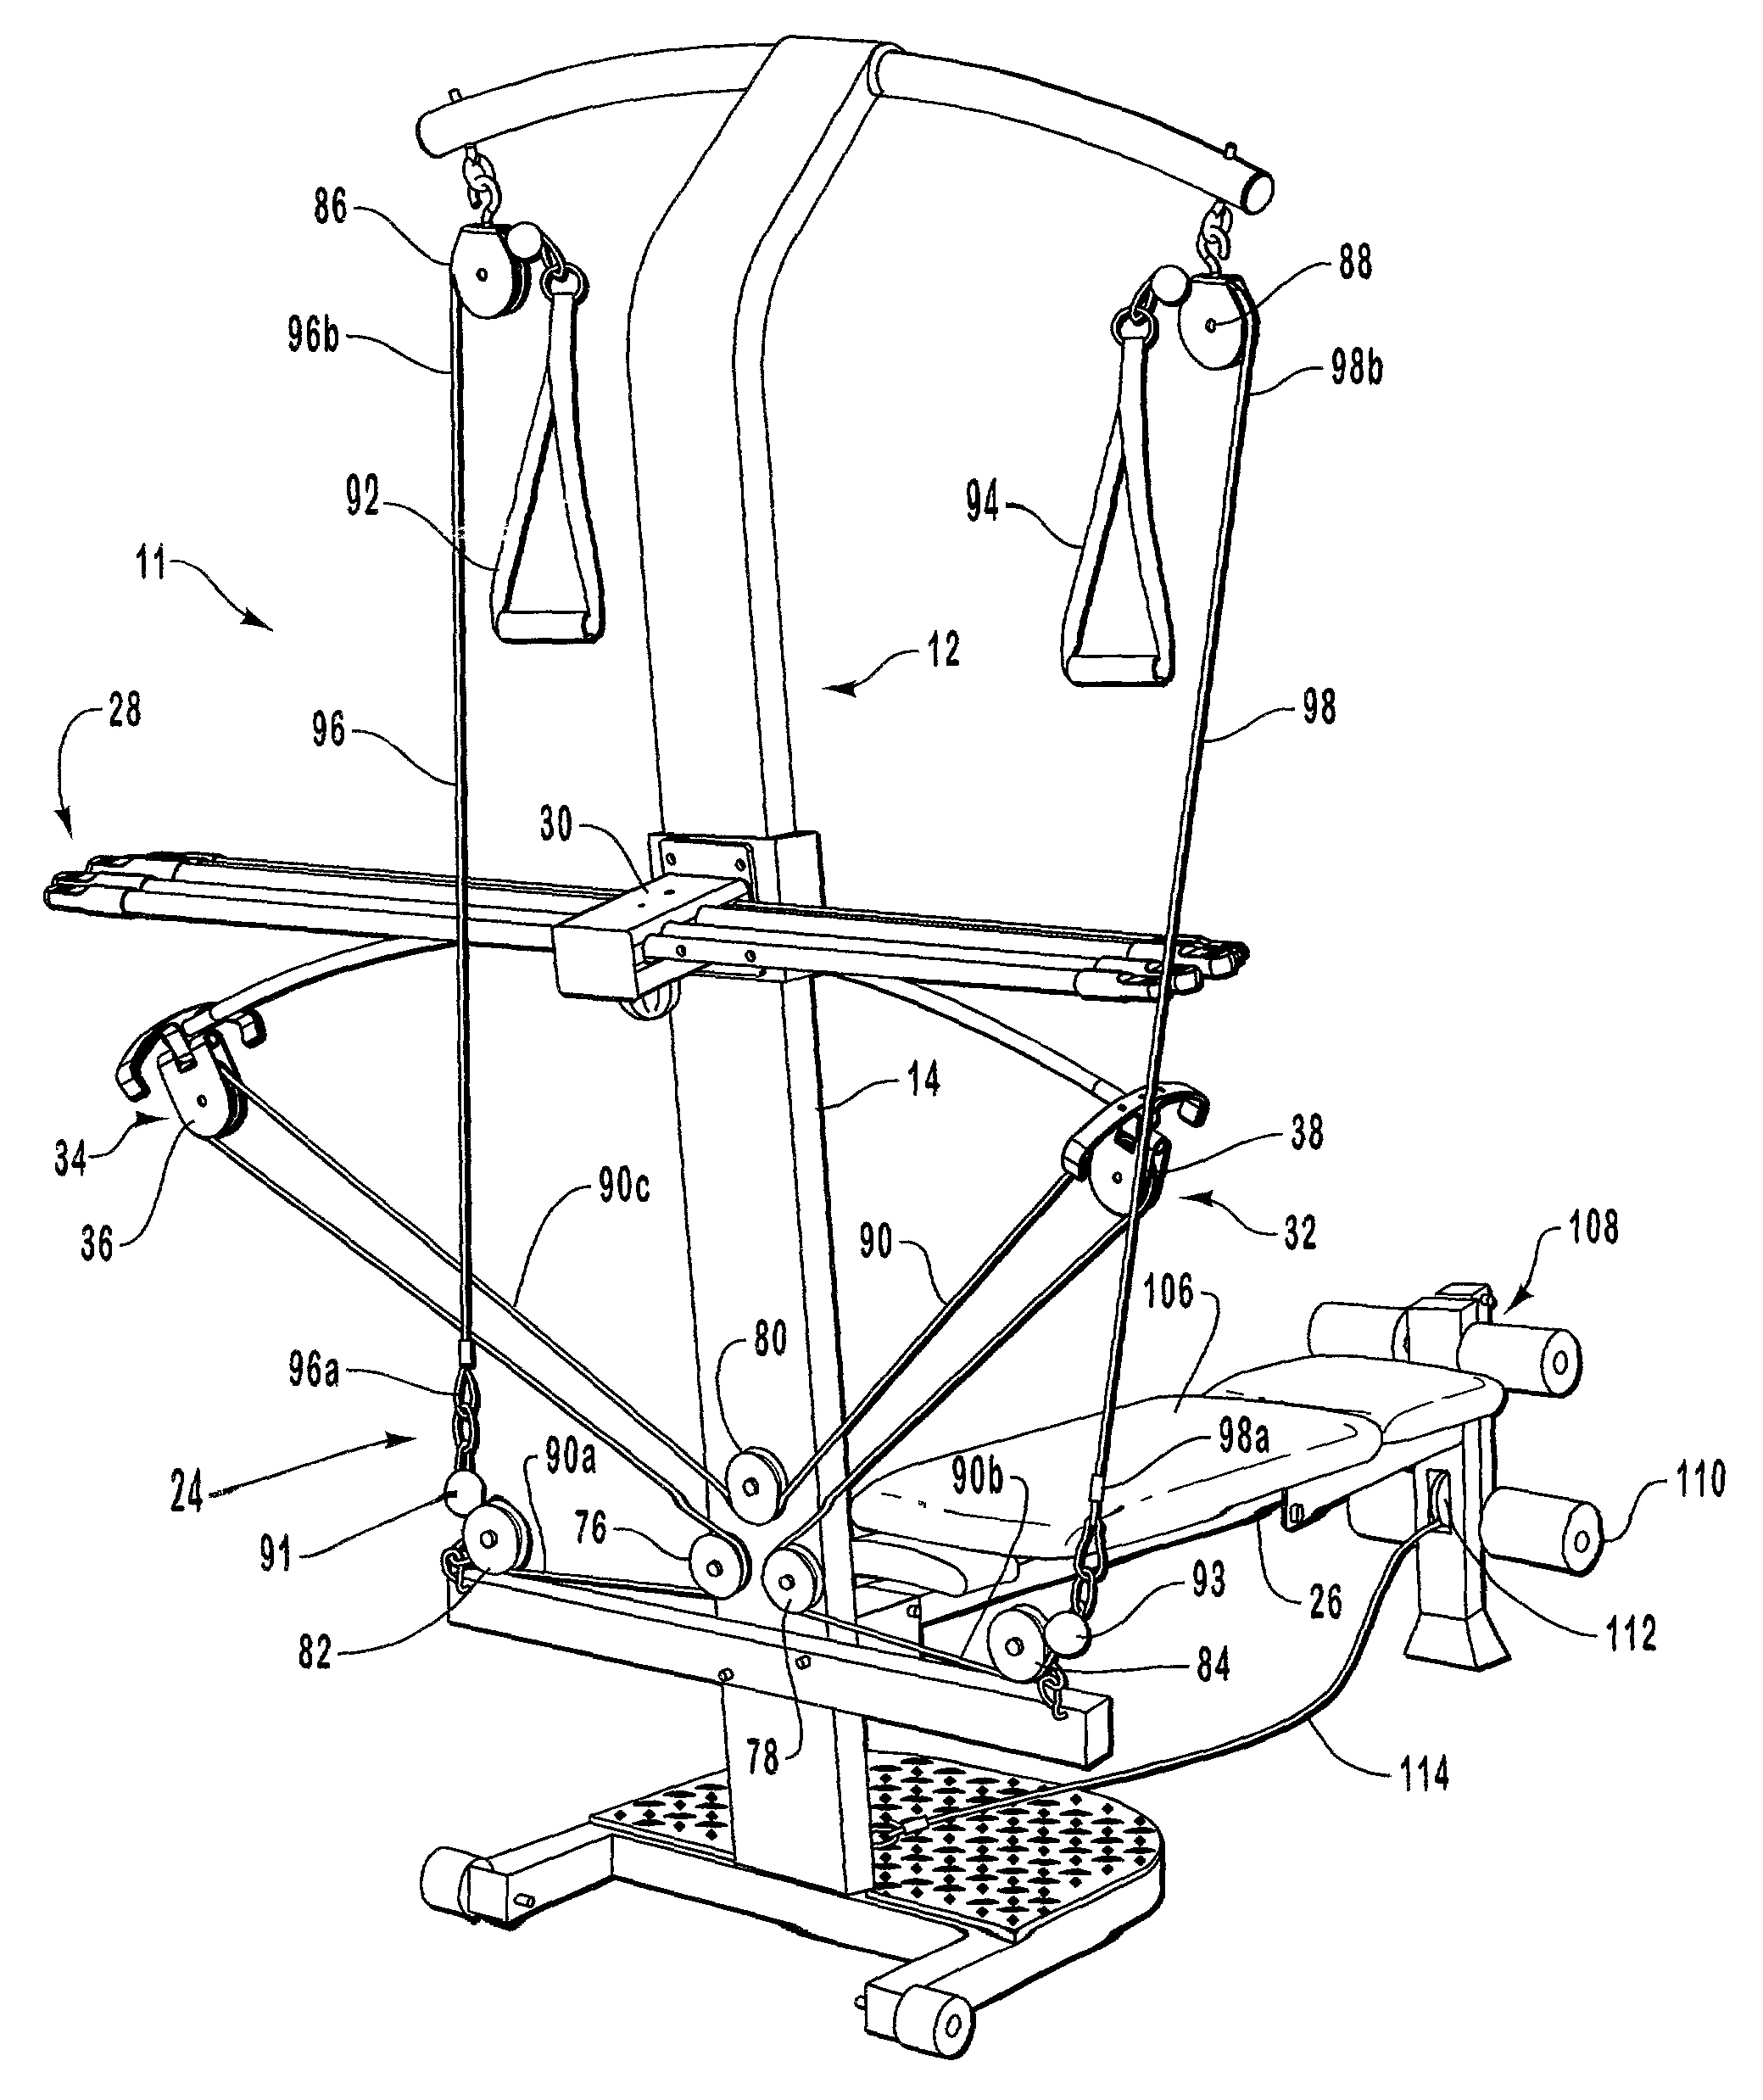 Exercise device with centrally mounted resistance rod